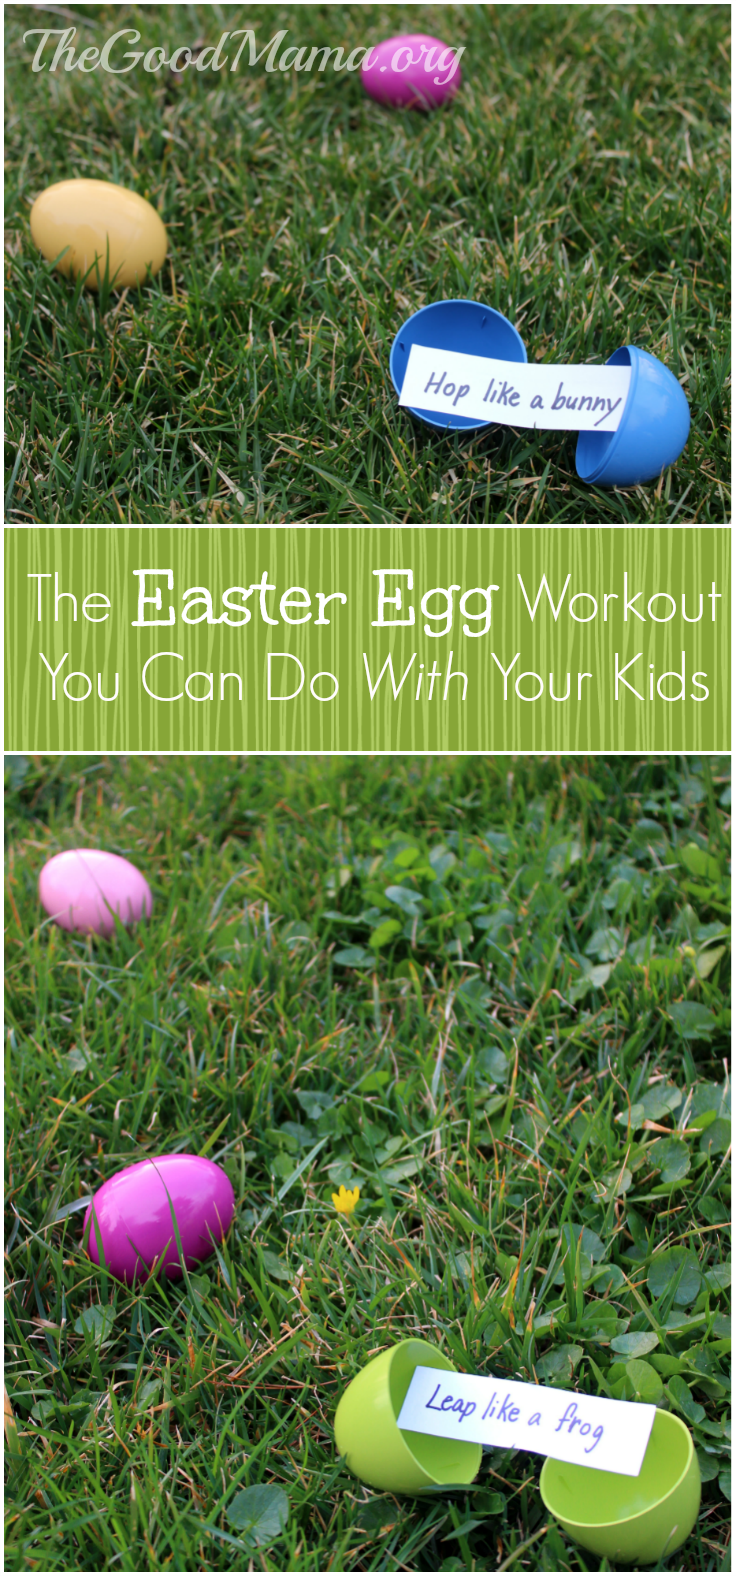 The Easter Egg Workout You Can Do with Your Kids